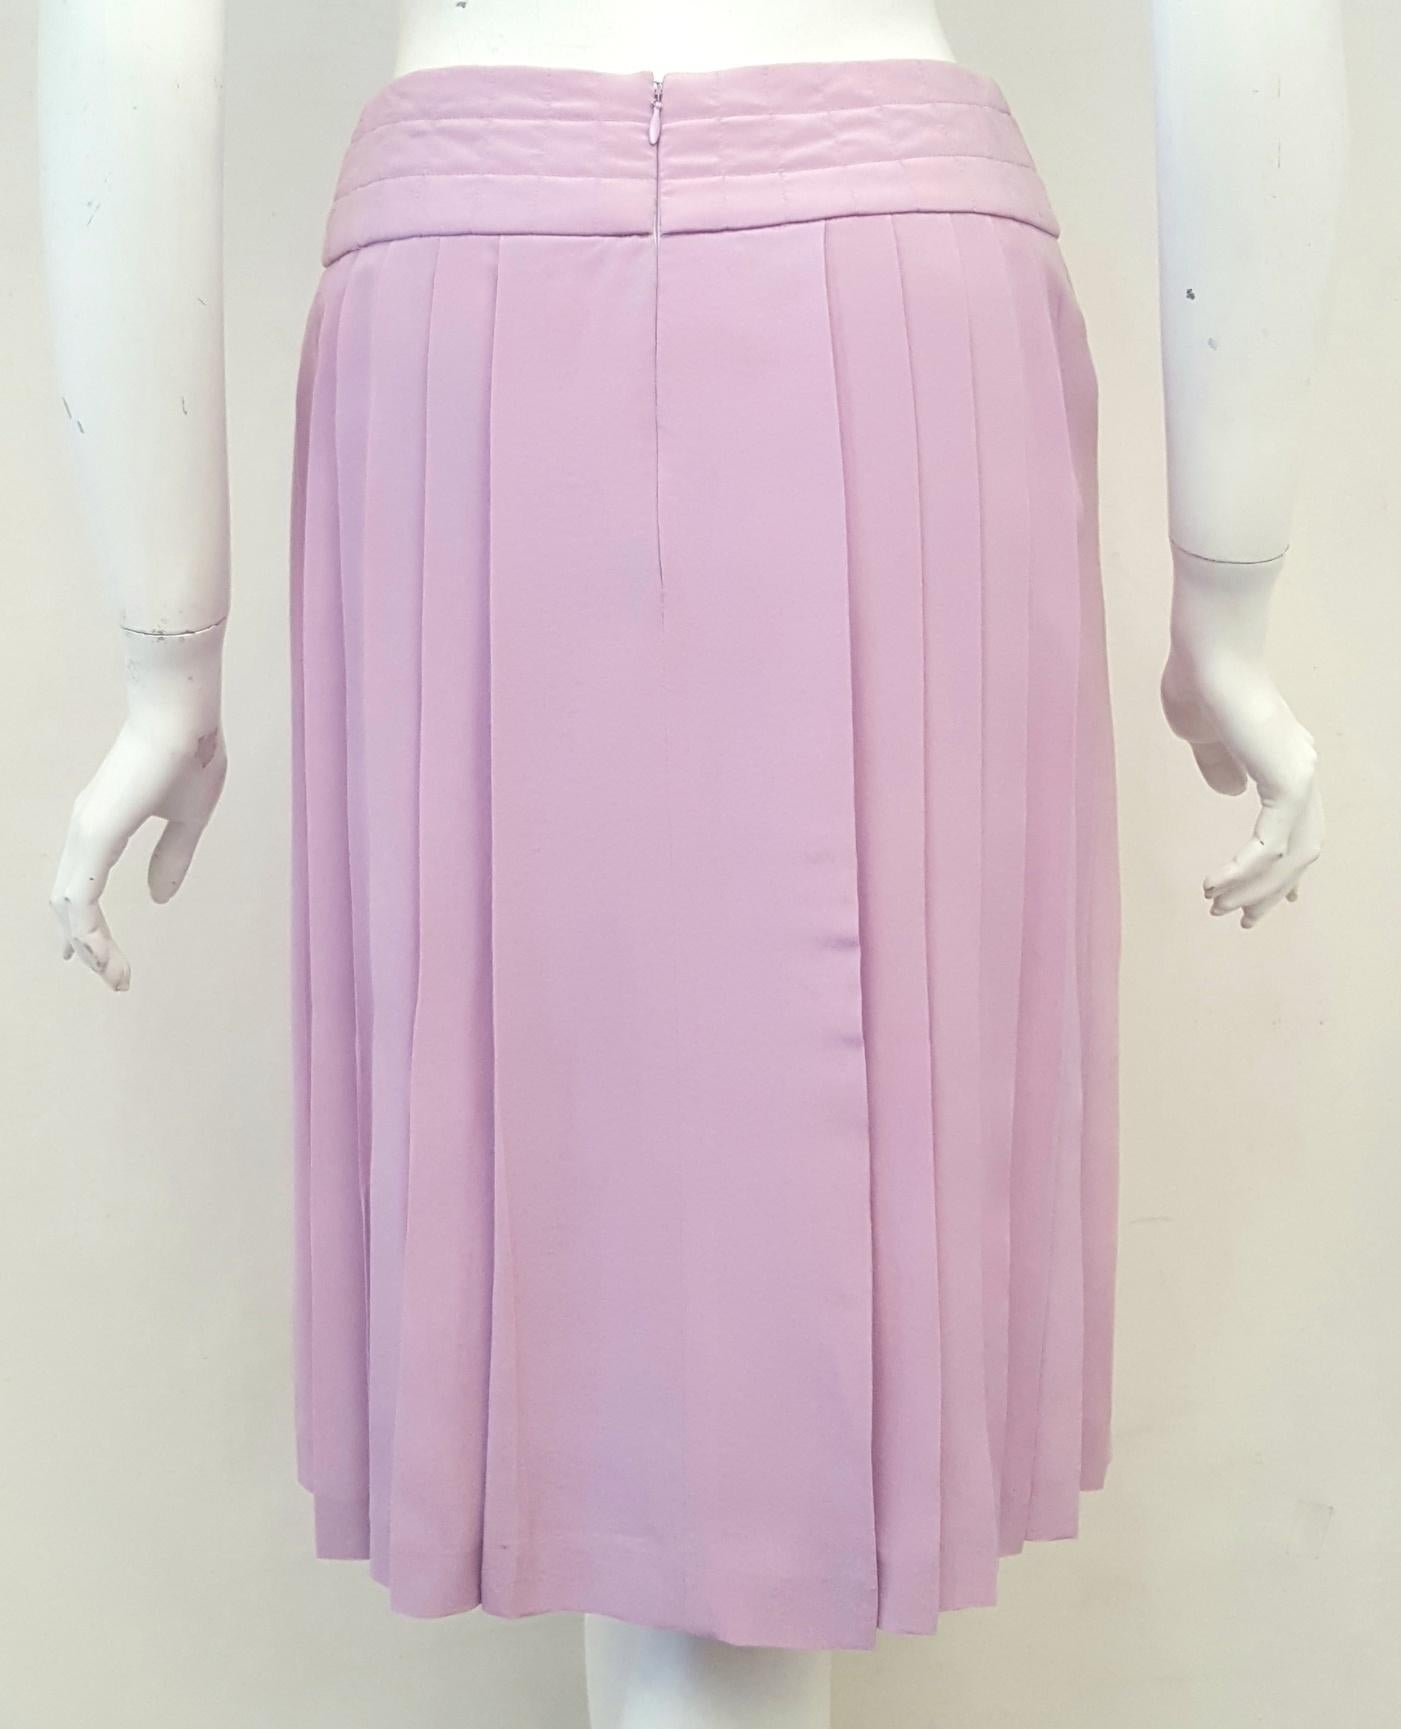 Chanel lavender silk pleated skirt featuring a horizontal pleated waistband and iconic Chanel mini plaque to one side.  This is such a sexy skirt when walking, it just swings with you!  Fabulous with black top or Chanel jacket finished with a Chanel